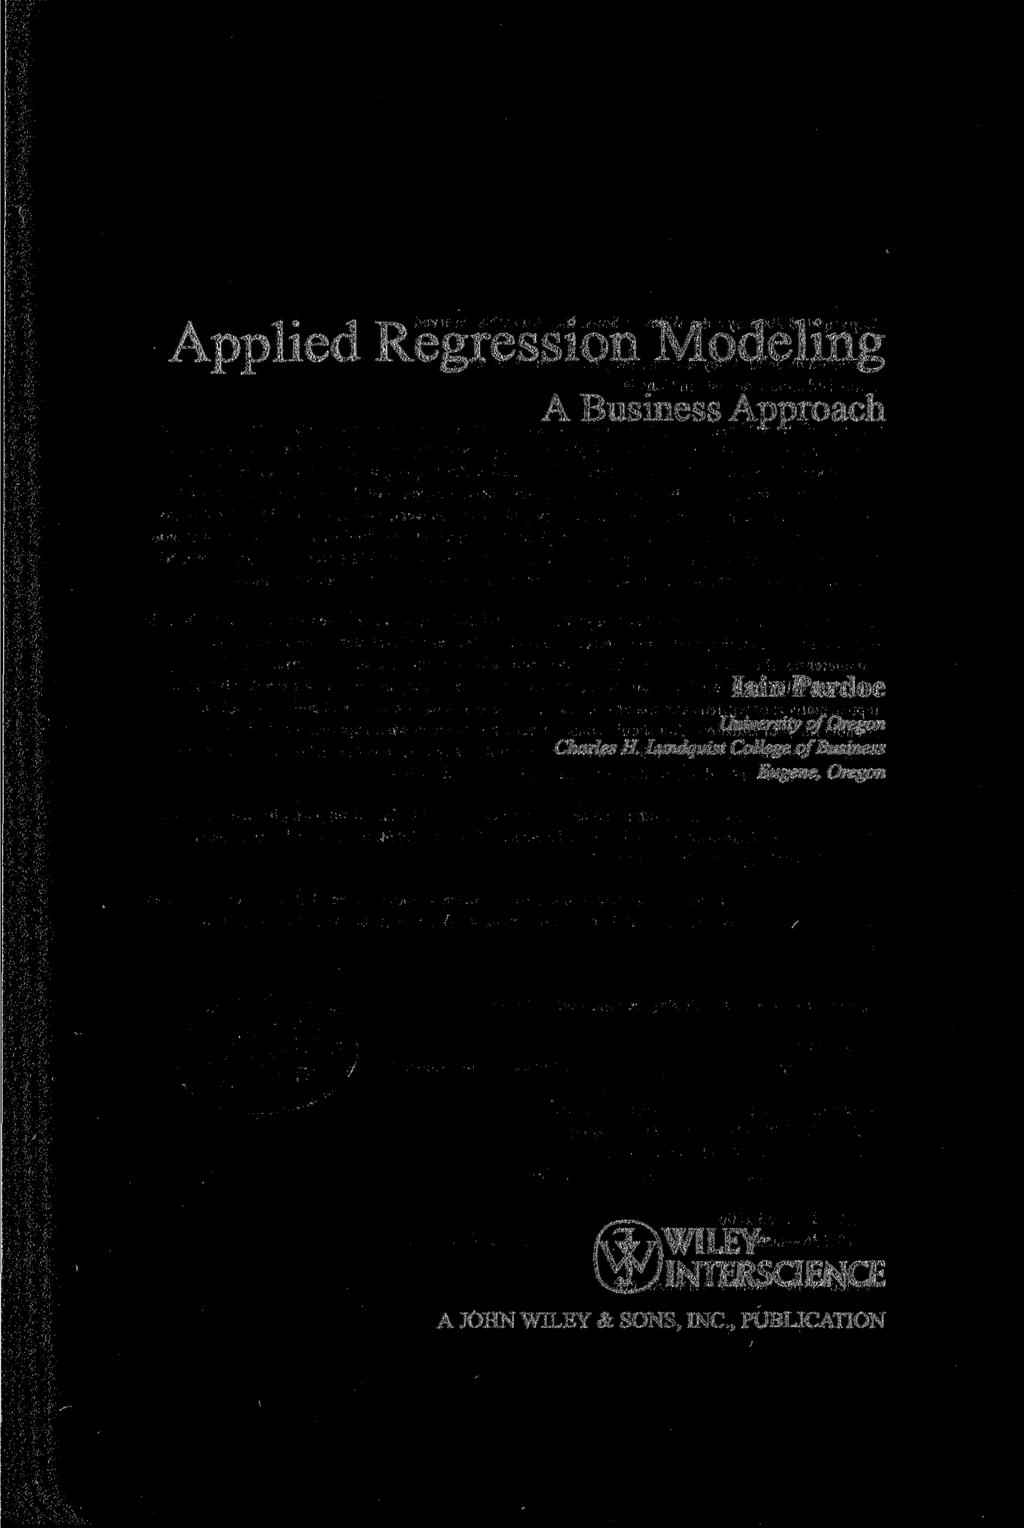 Applied Regression Modeling A Business Approach Iain Pardoe University of Oregon Charles H.